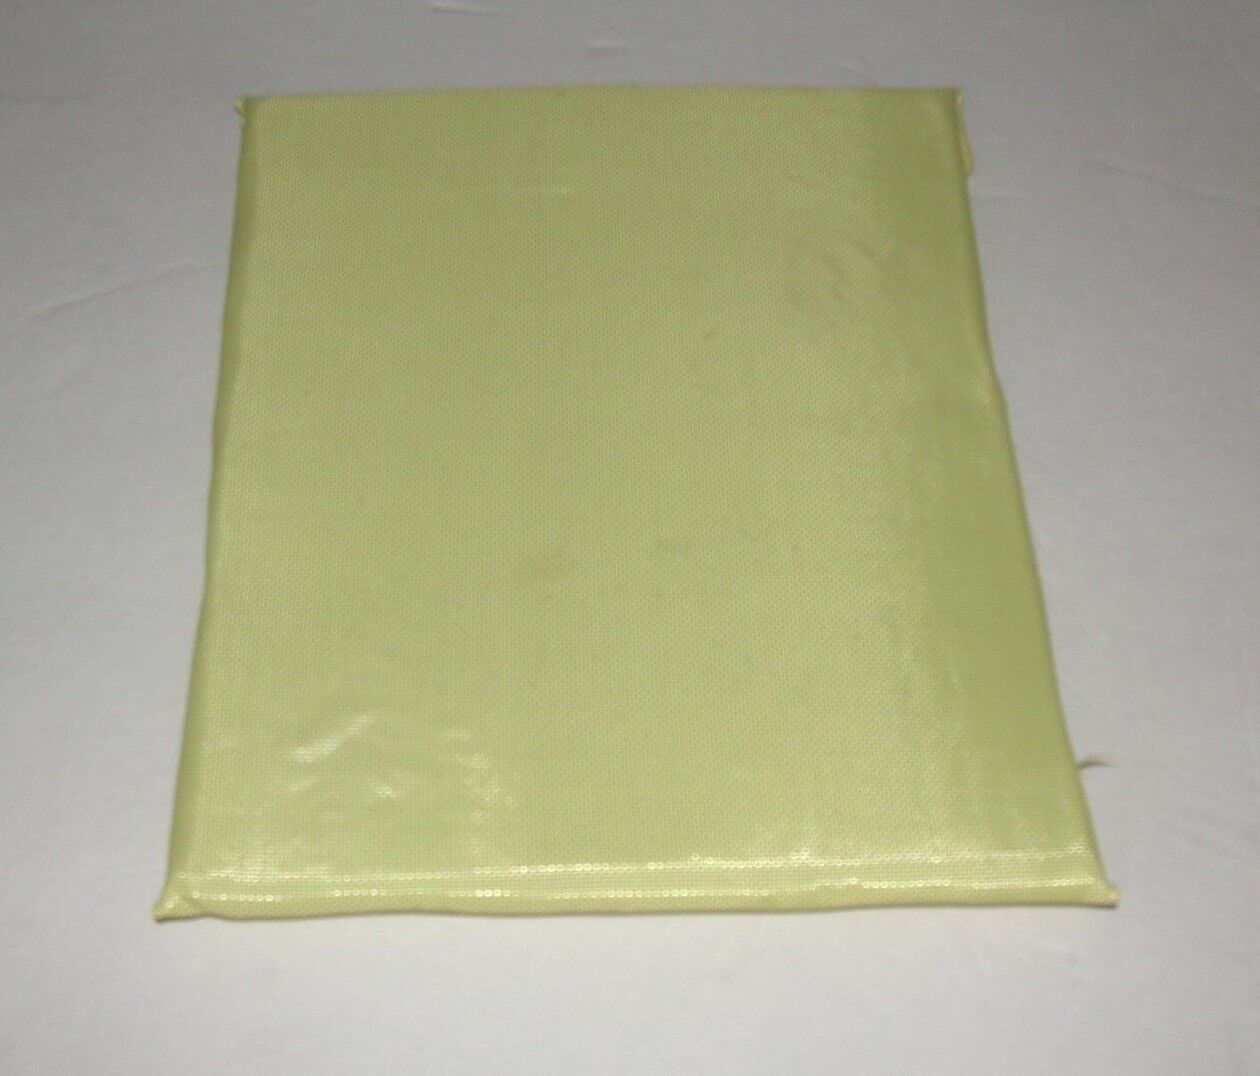 8x10 Level IIIA Body Armor Plate Bullet Proof Insert Made with DuPont Kevlar